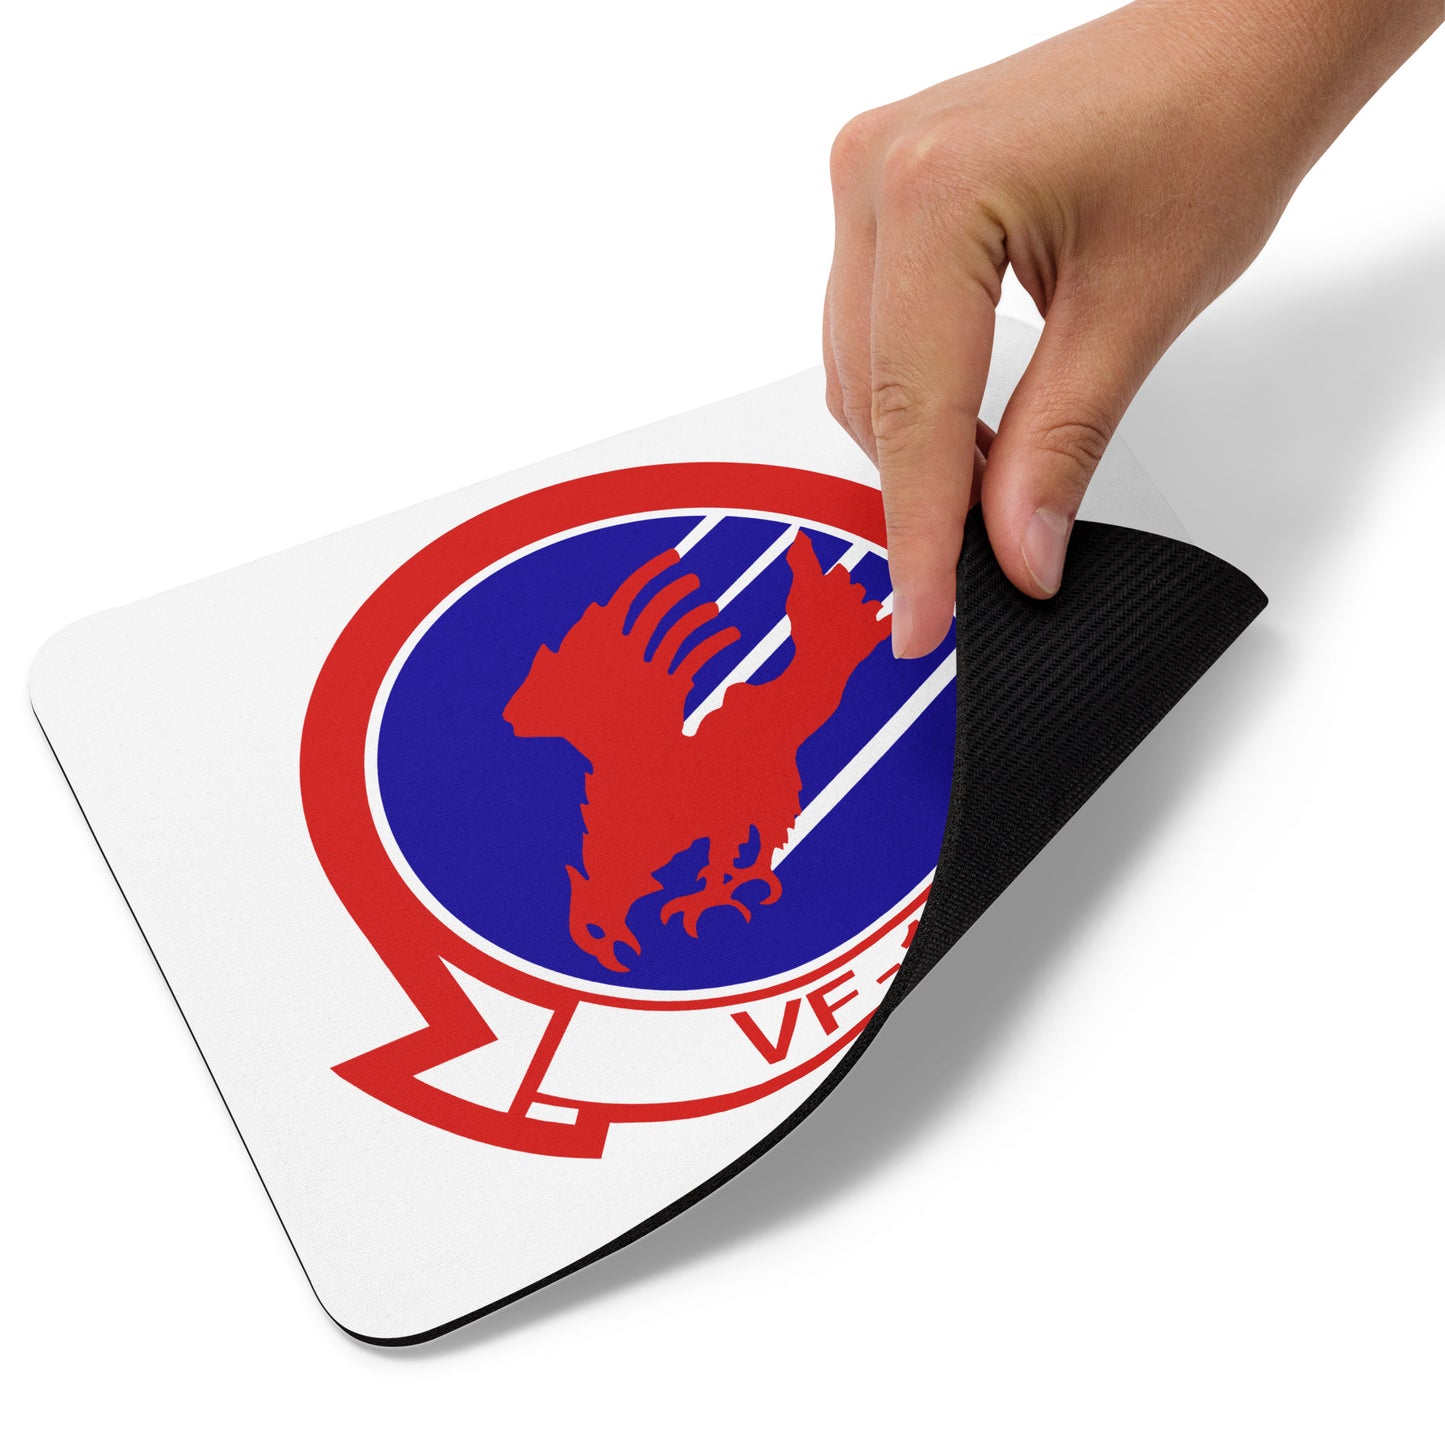 VF-1 Insignia Mouse pad